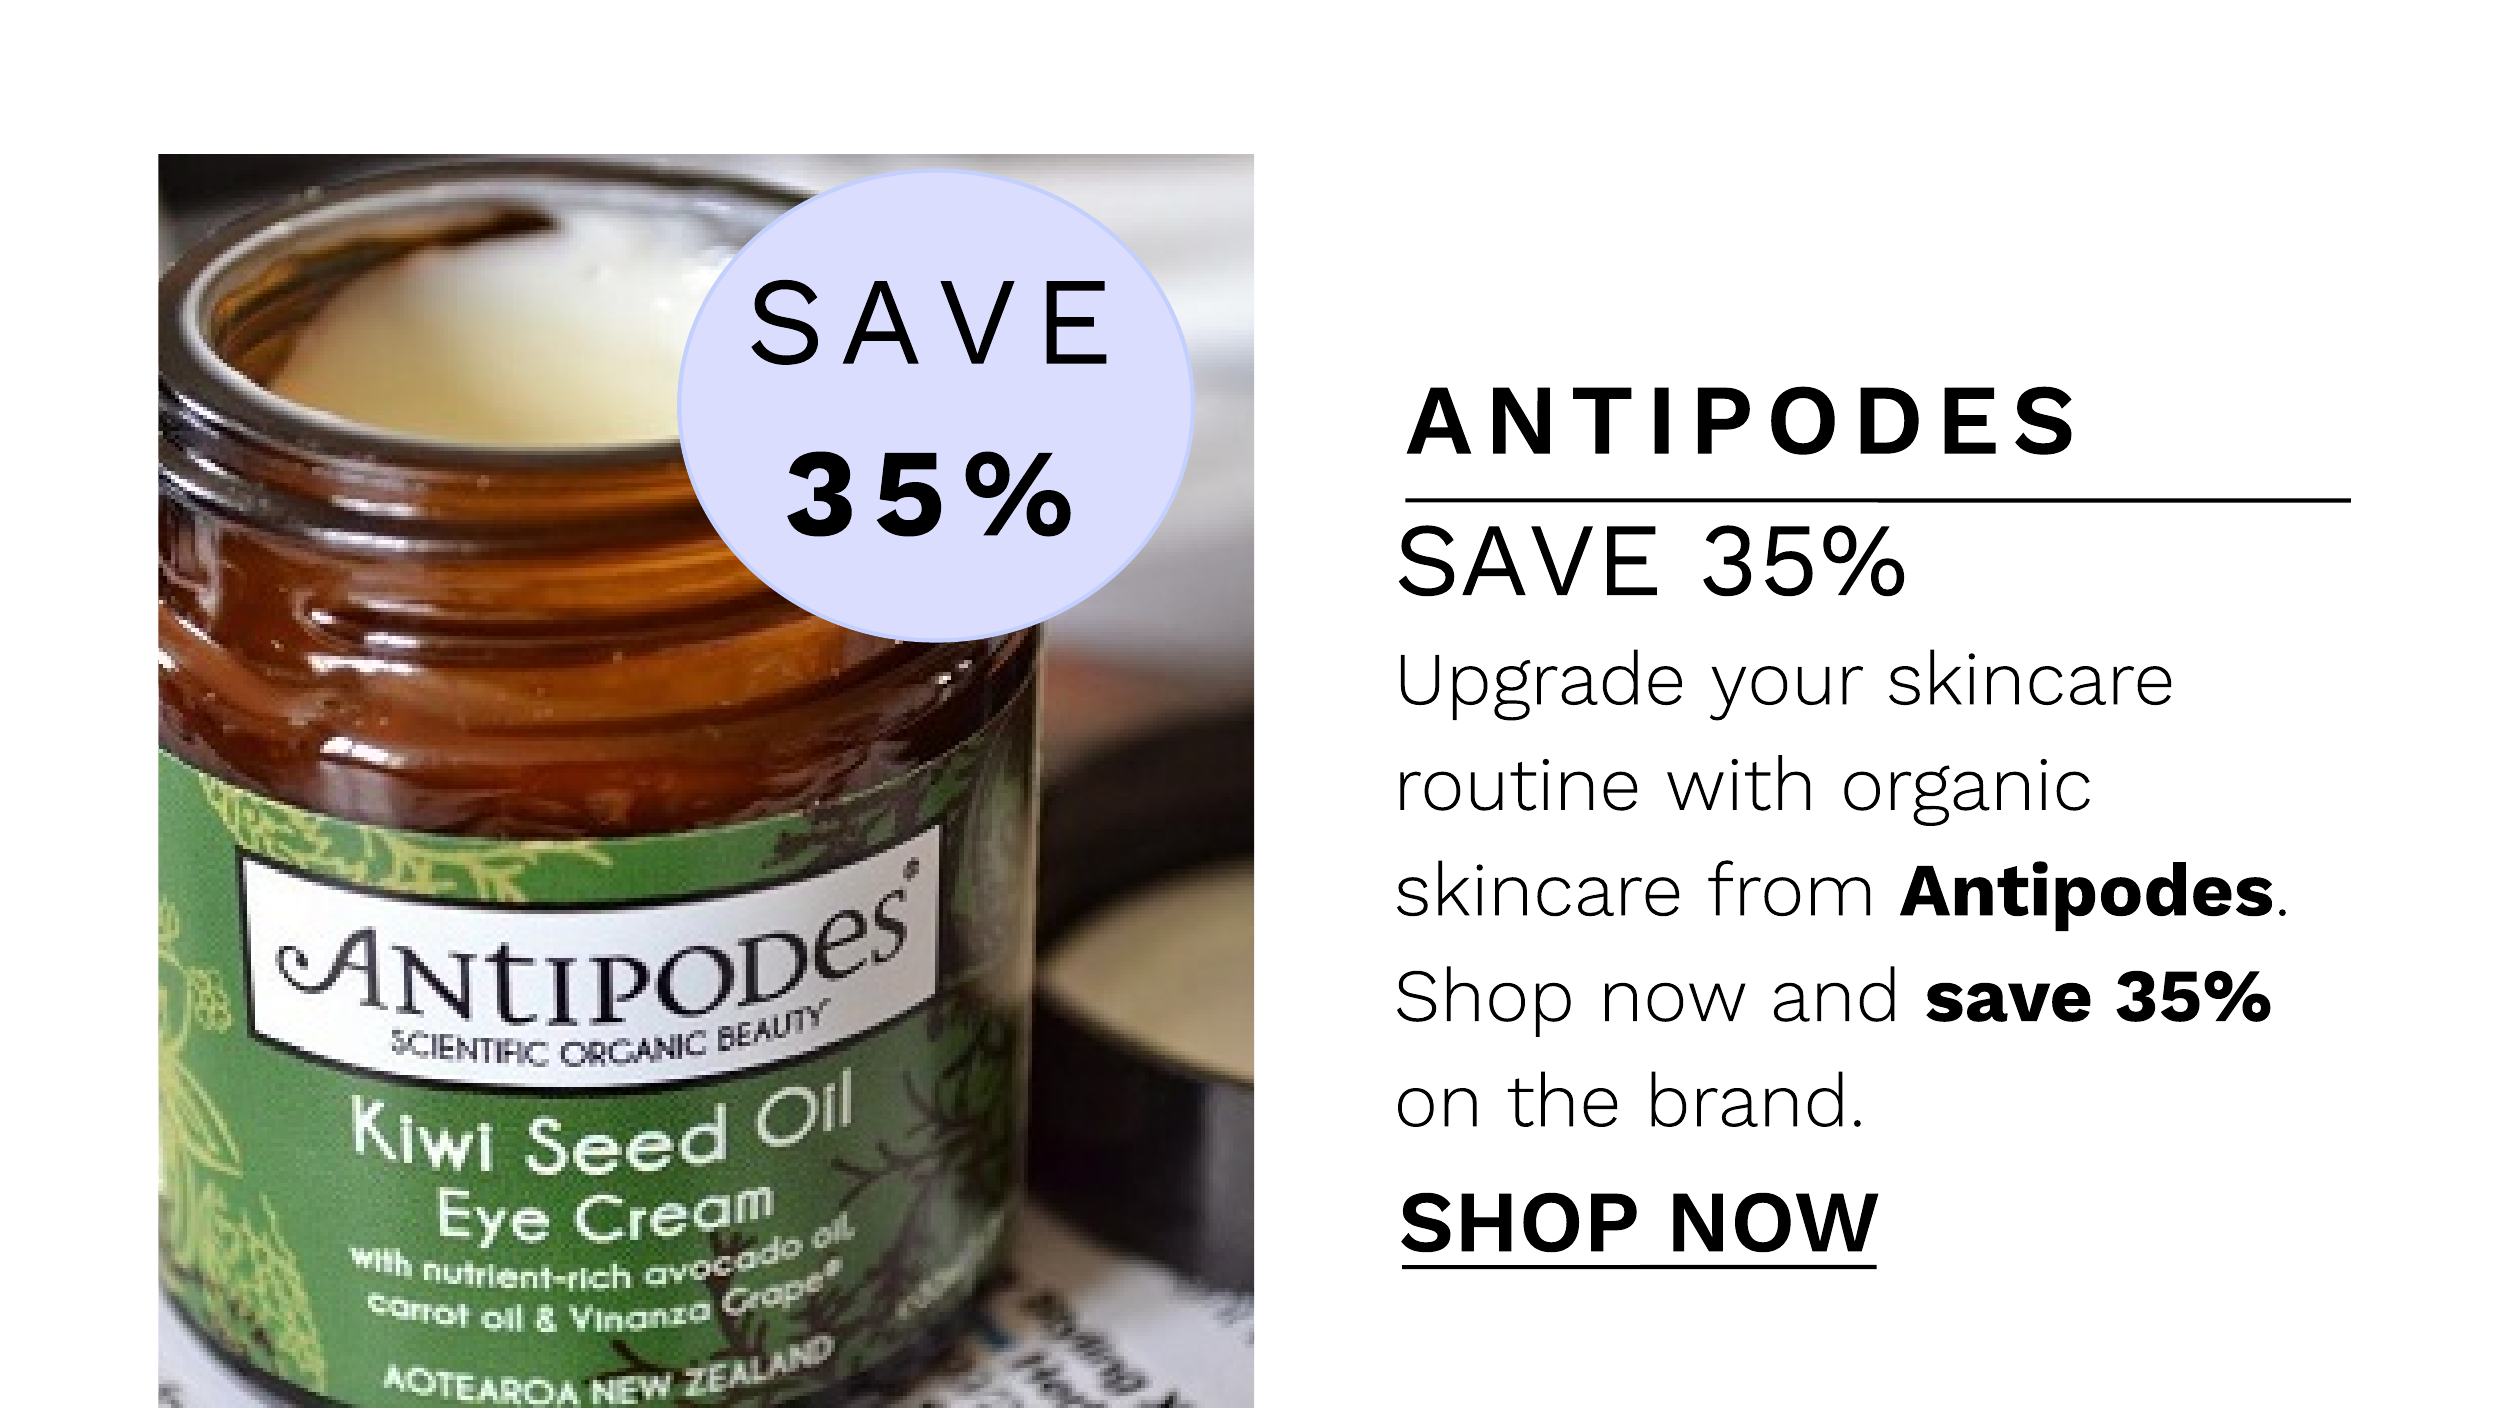 ANTIPODES SAVE 35% Upgrade your skincare routine with organic skincare from Antipodes. " U"11:1-1 Shop now and save 35% : SCIENTIC CREAMIC BE . on the brand. SHOP NOW 